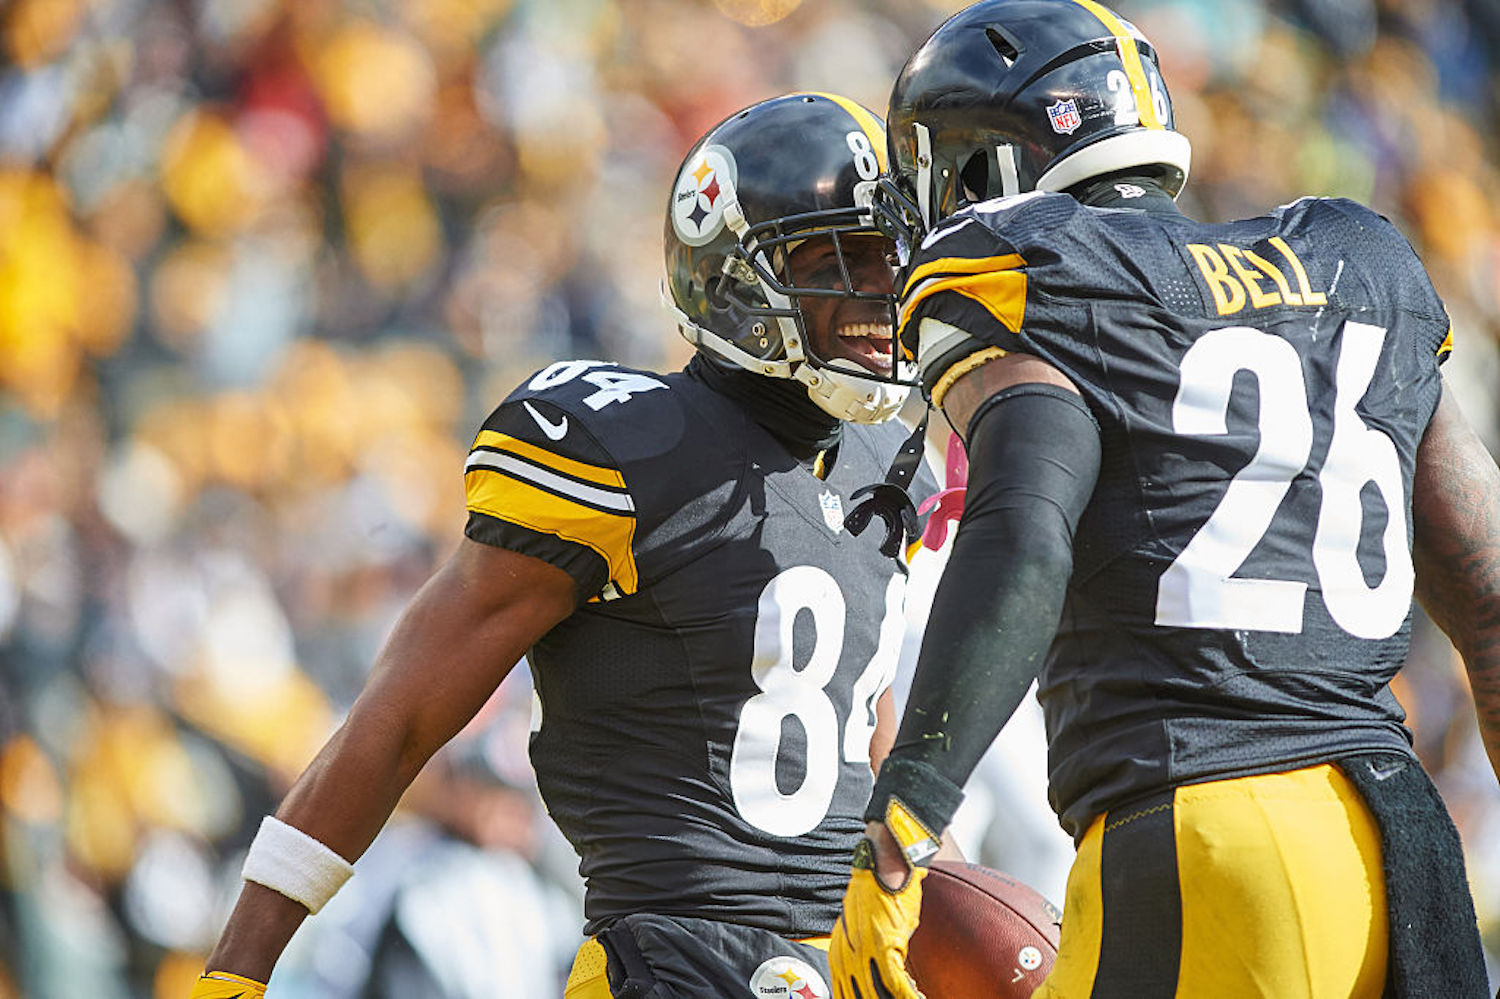 Le'Veon Bell and Antonio Brown were the most dominant RB/WR duo in the NFL just three years ago, but now they're both unemployed.